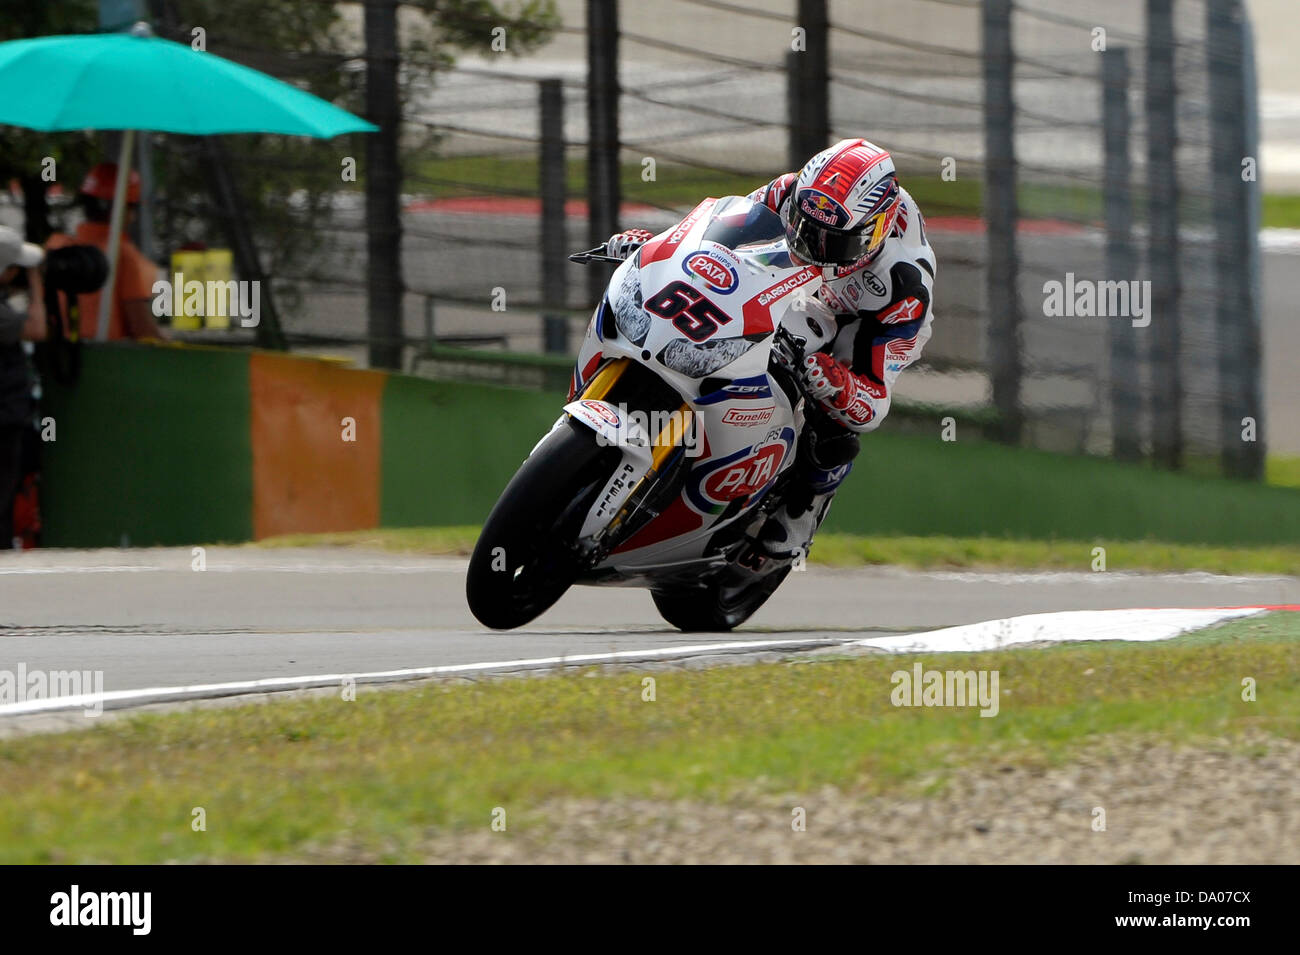 Imola, Italy. 29th June 2013. Jonathan Rea  during the World Superbikes Championships from Imola. Stock Photo